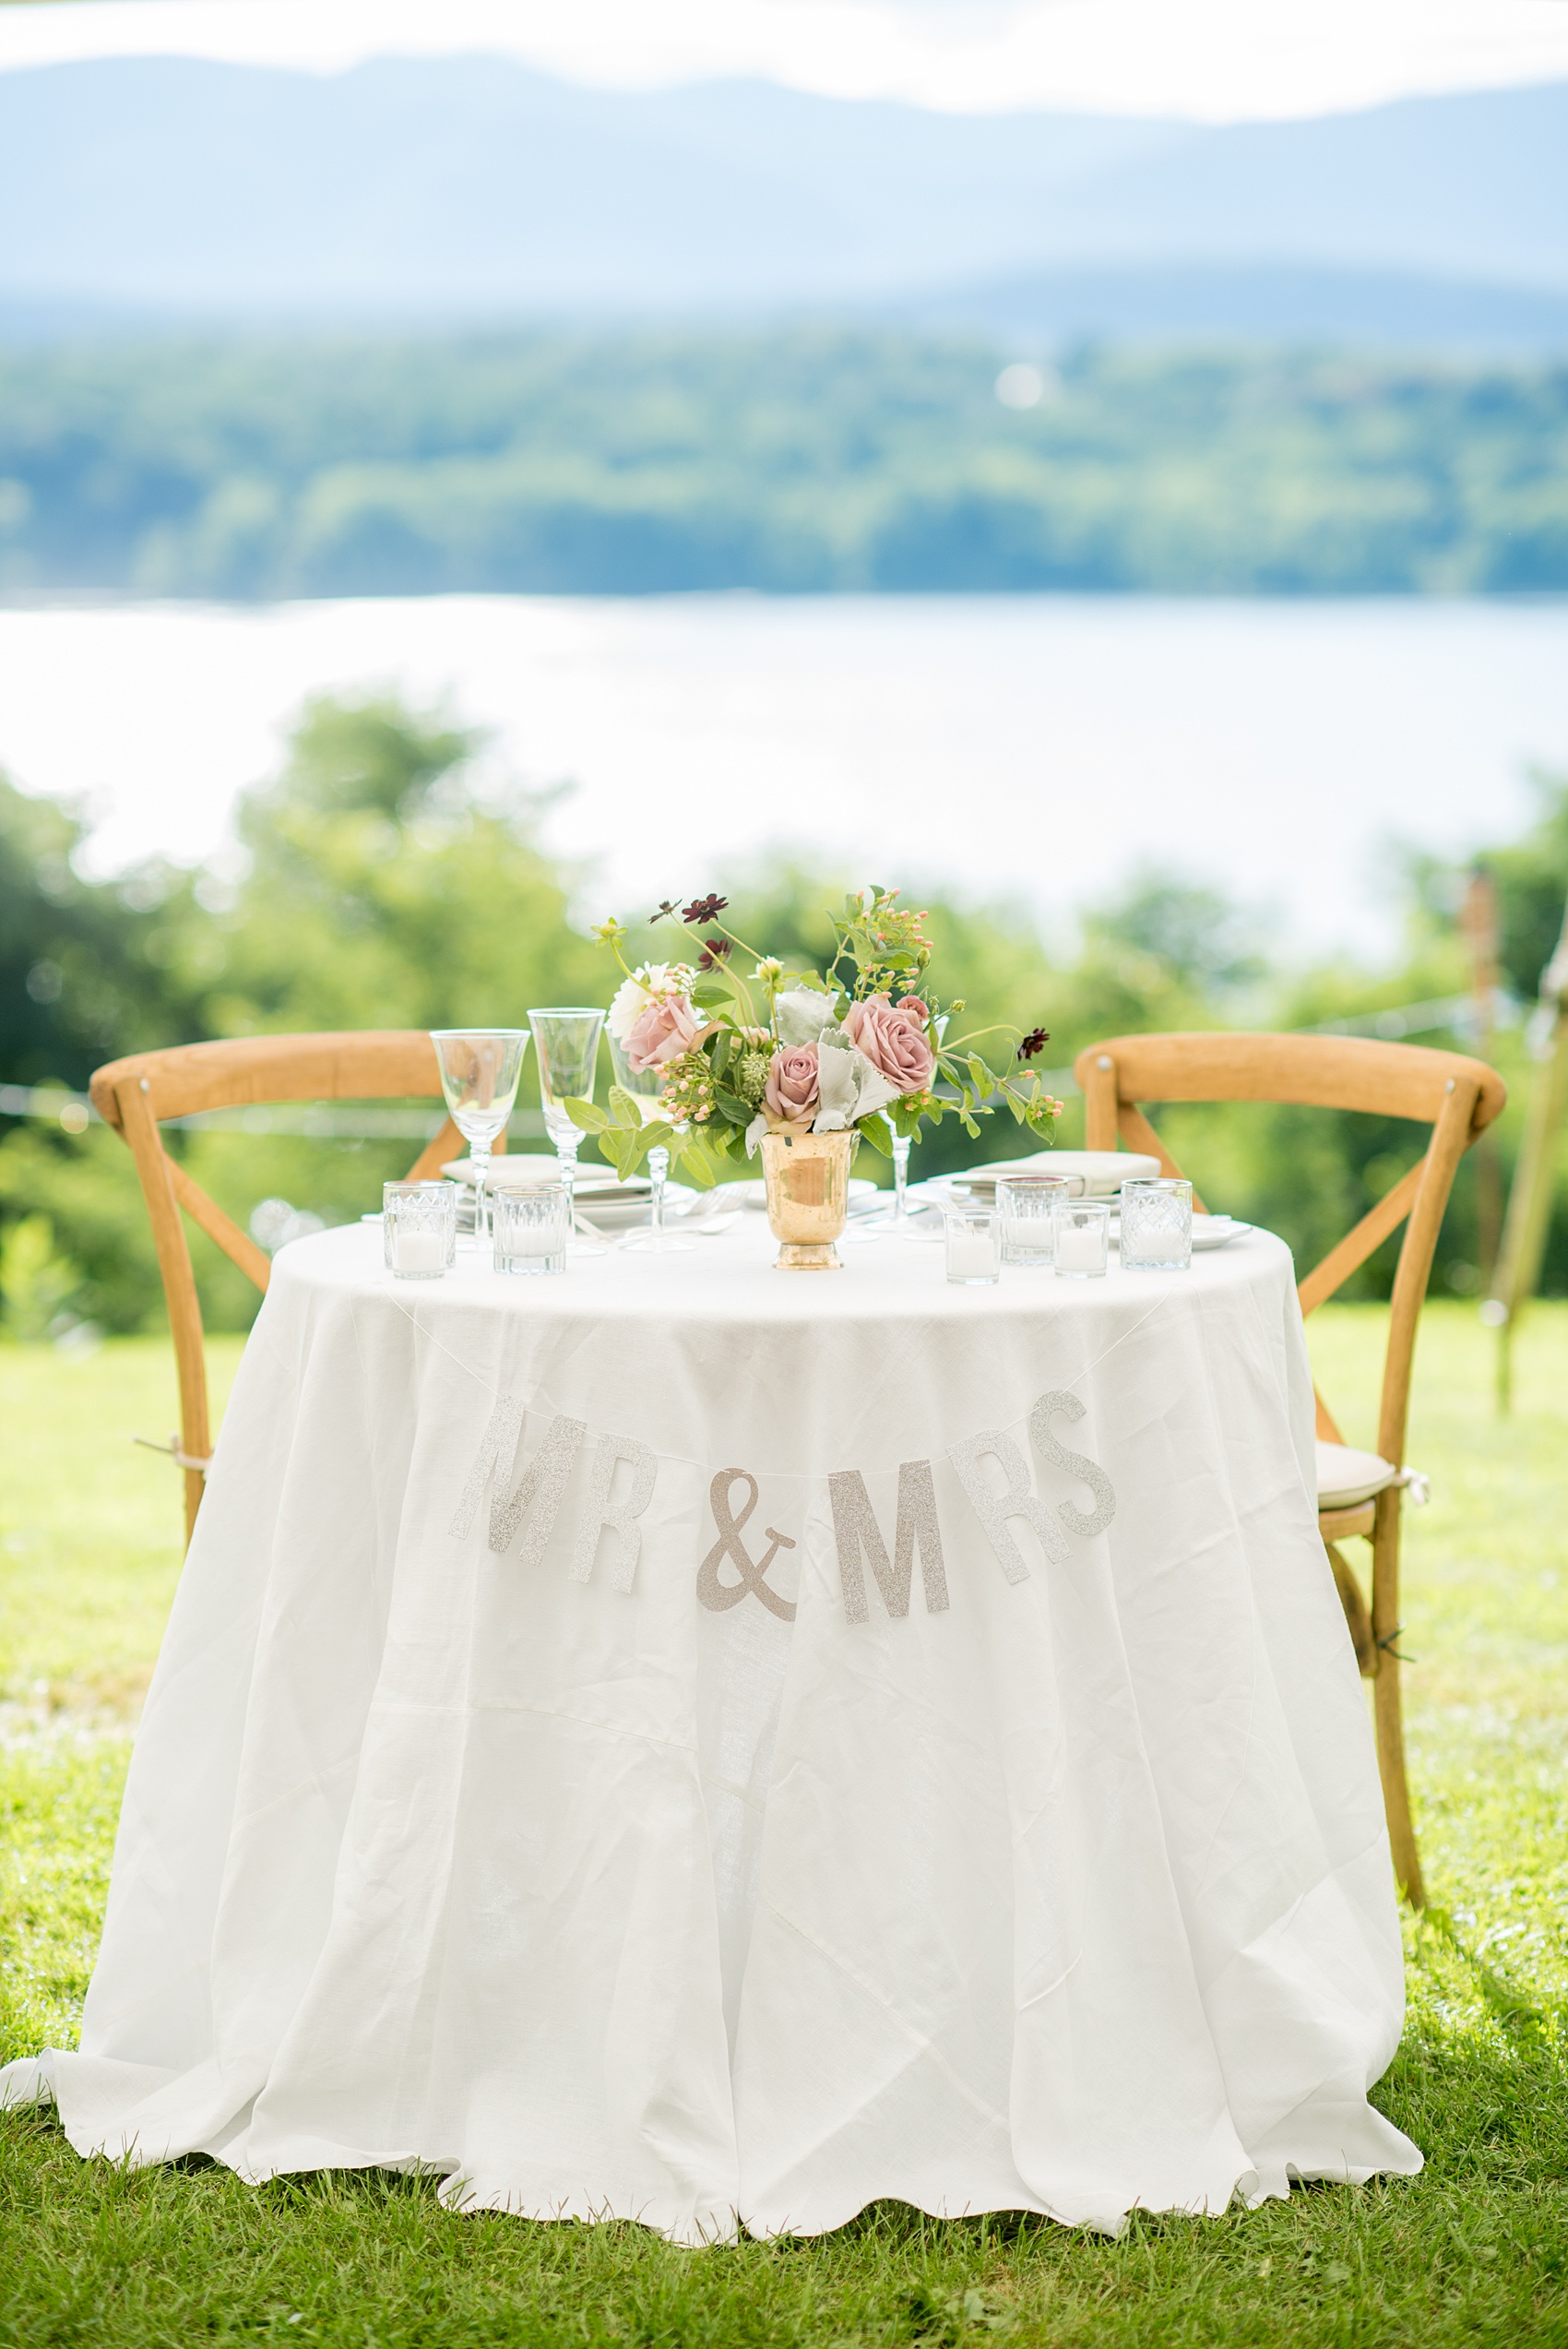 Mikkel Paige Photography photos from a Southwood Estate Wedding in Germantown, New York in the Hudson Valley. Picture of the round sweetheart table with floral centerpiece and silver glitter Mr. and Mrs. sign.